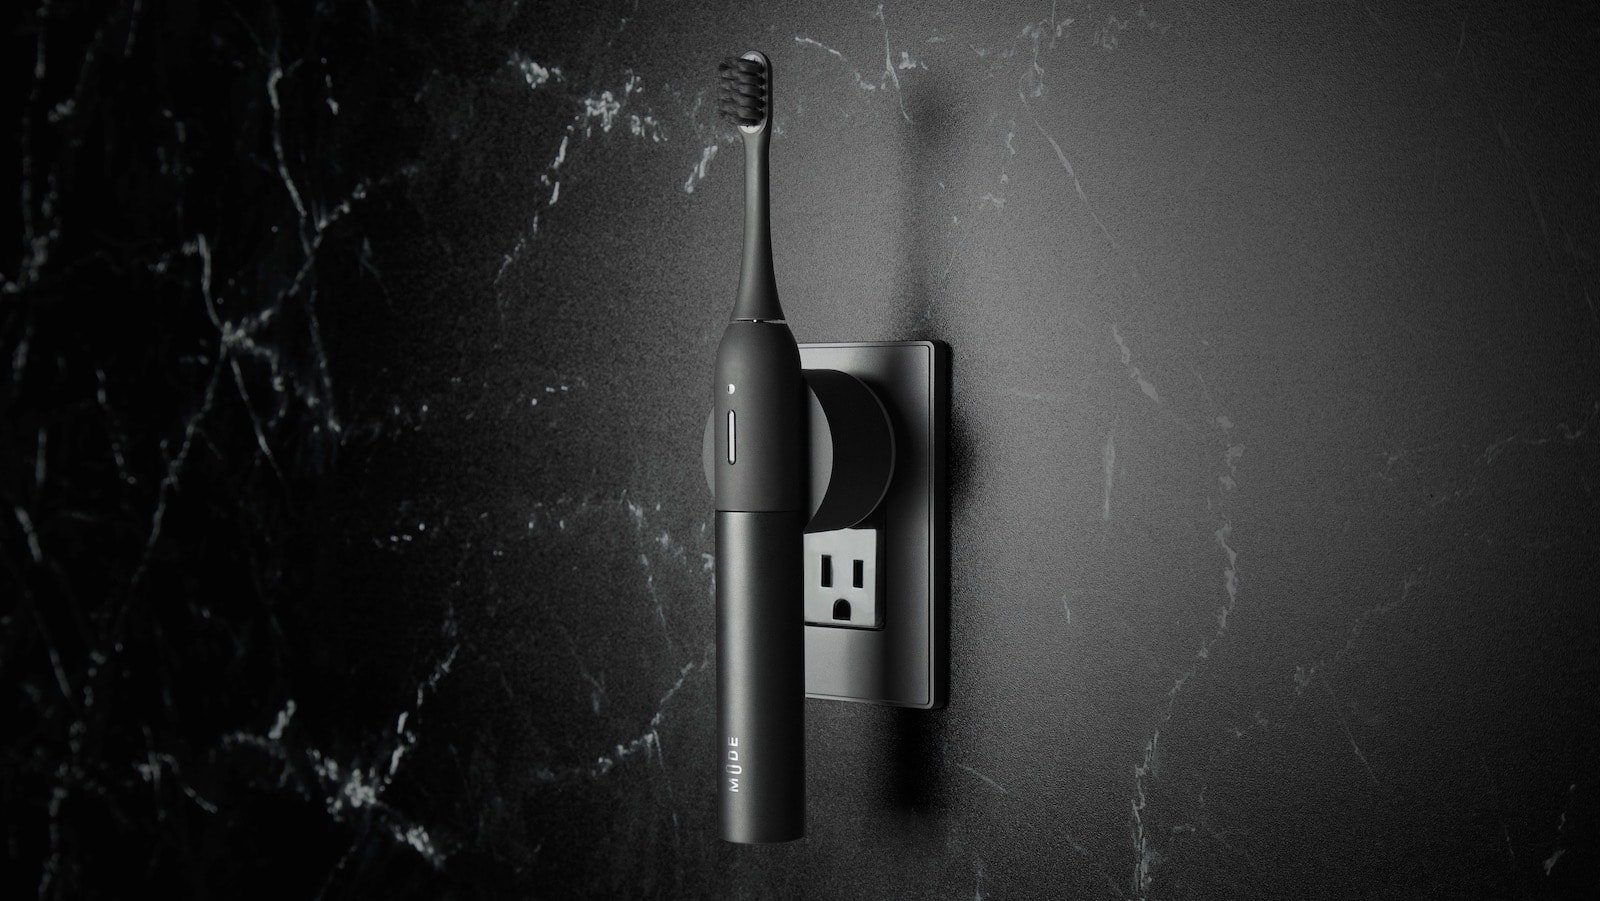 Mode wireless charging toothbrush has a luxurious design that docks magnetically